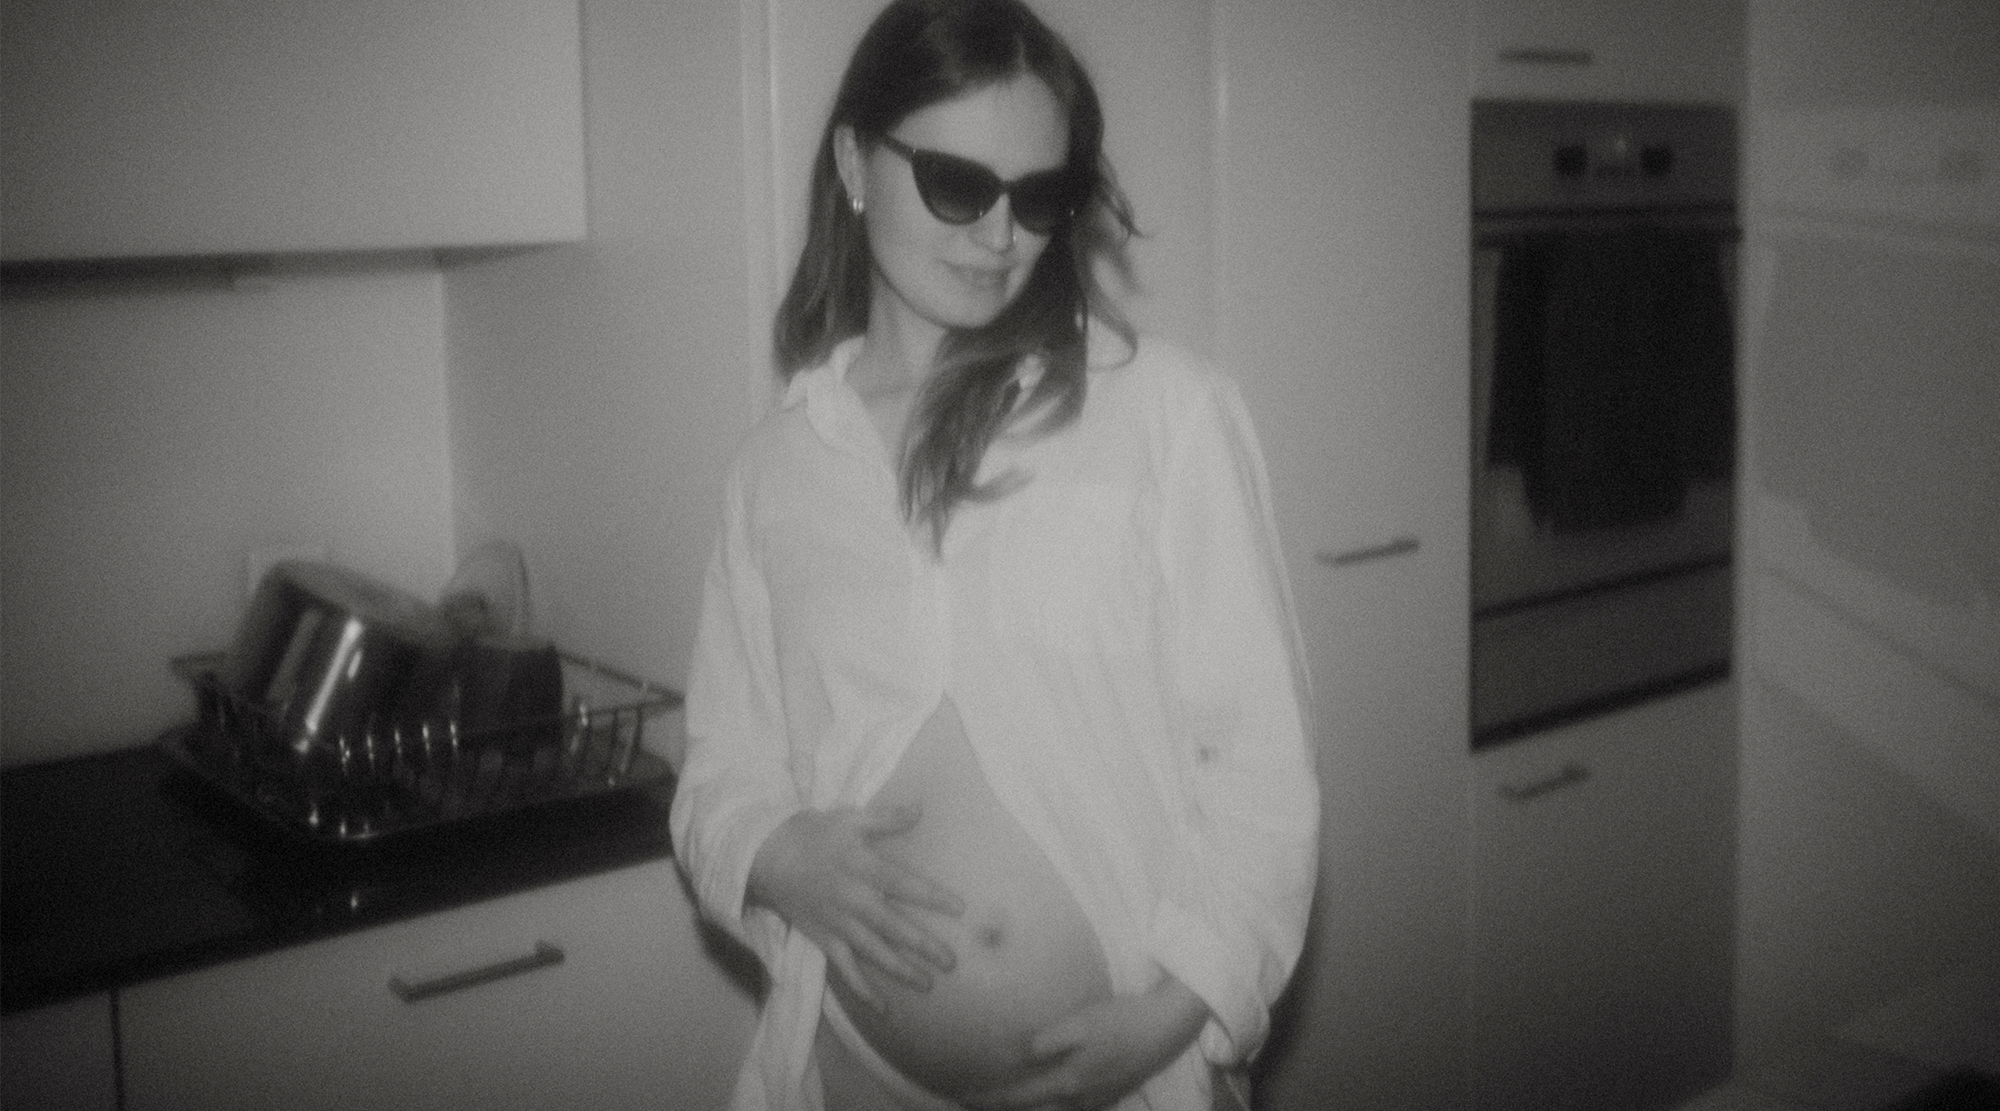 Lifestyle pregnancy photo of a pregnant woman. She is wearing black glasses and it is a trashy black and white photo.